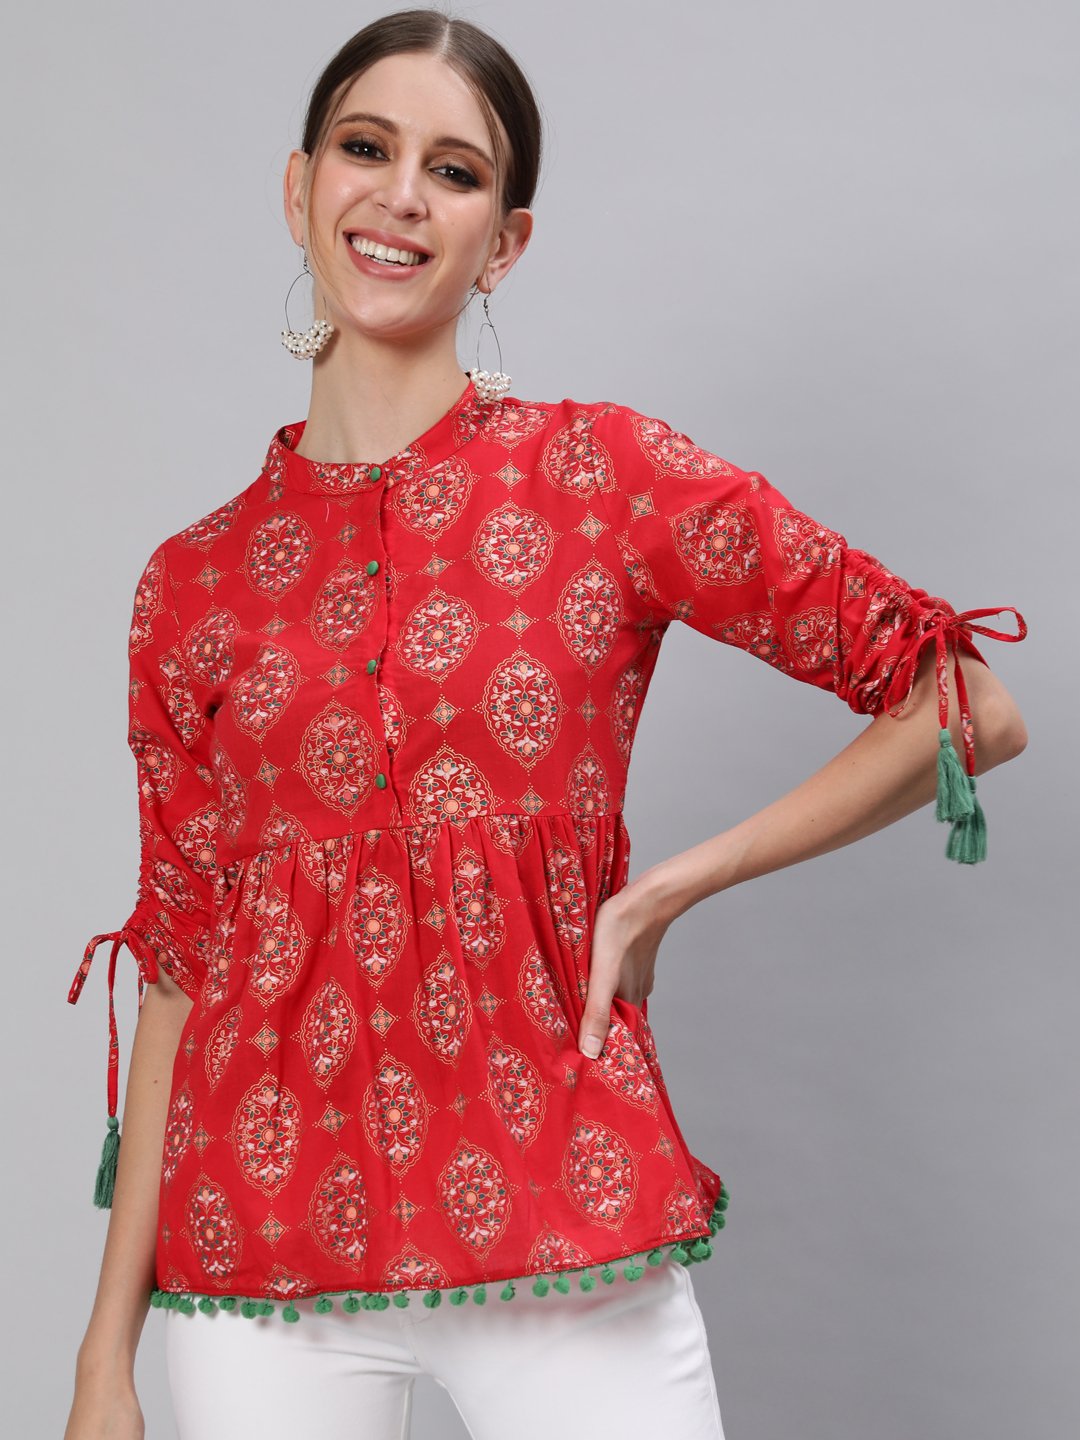 Ishin Women's Cotton Red Floral Printed A-Line Top